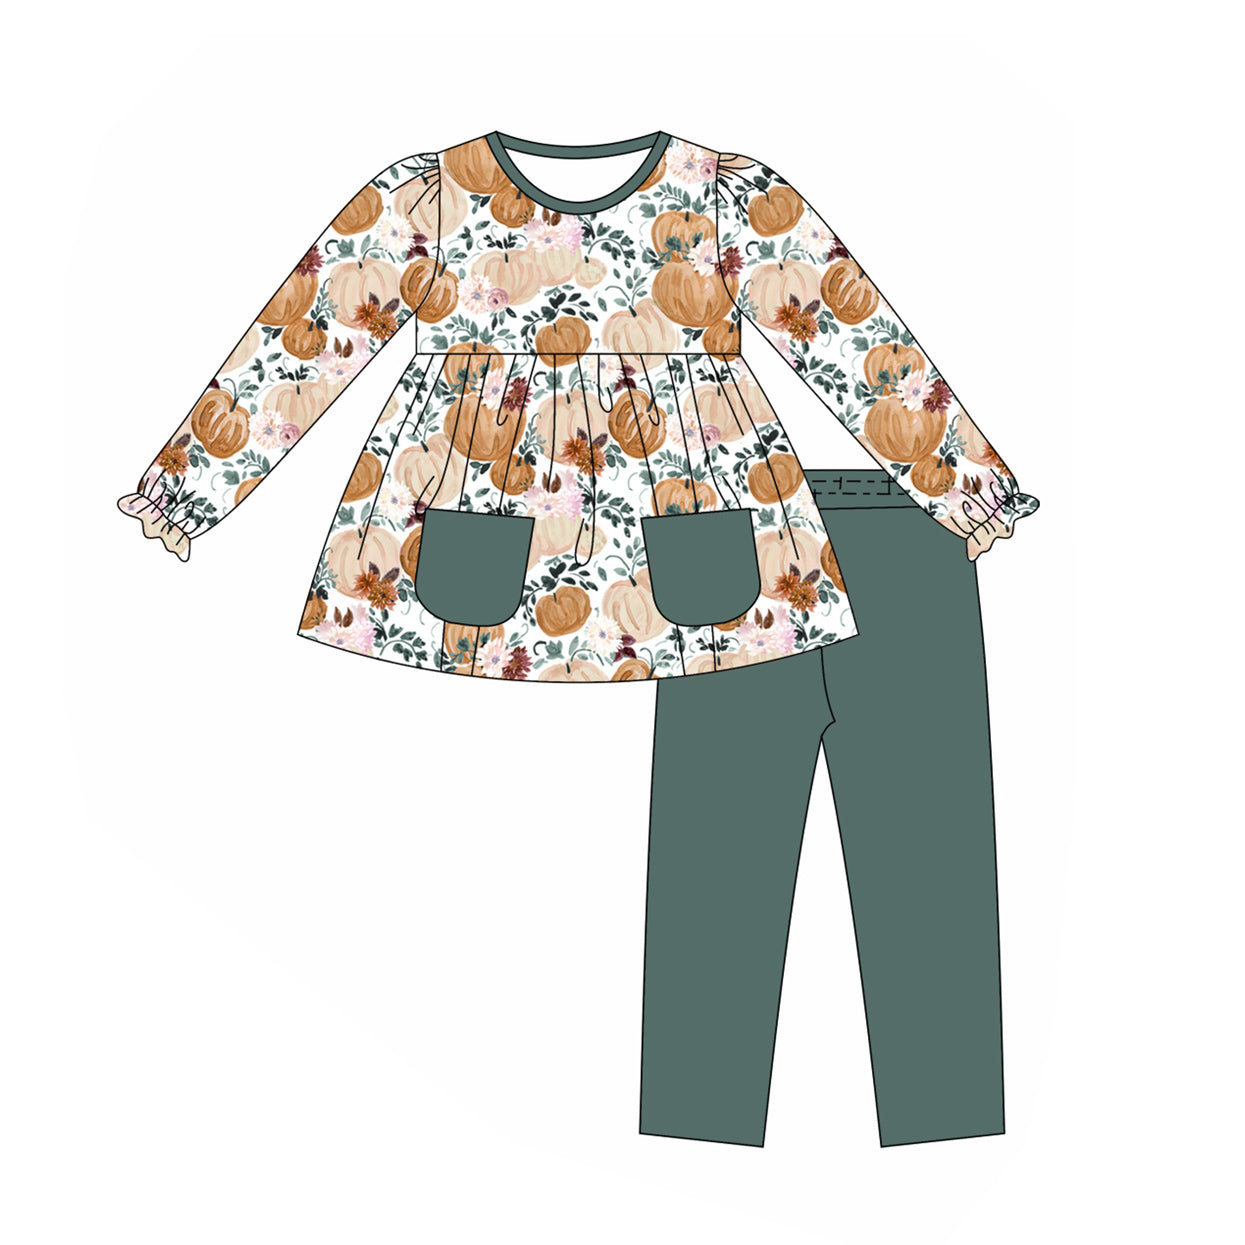 No moq GLP1432 Pre-order Size 3-6m to 14-16t baby girl clothes long sleeve top with trousers kids autumn set